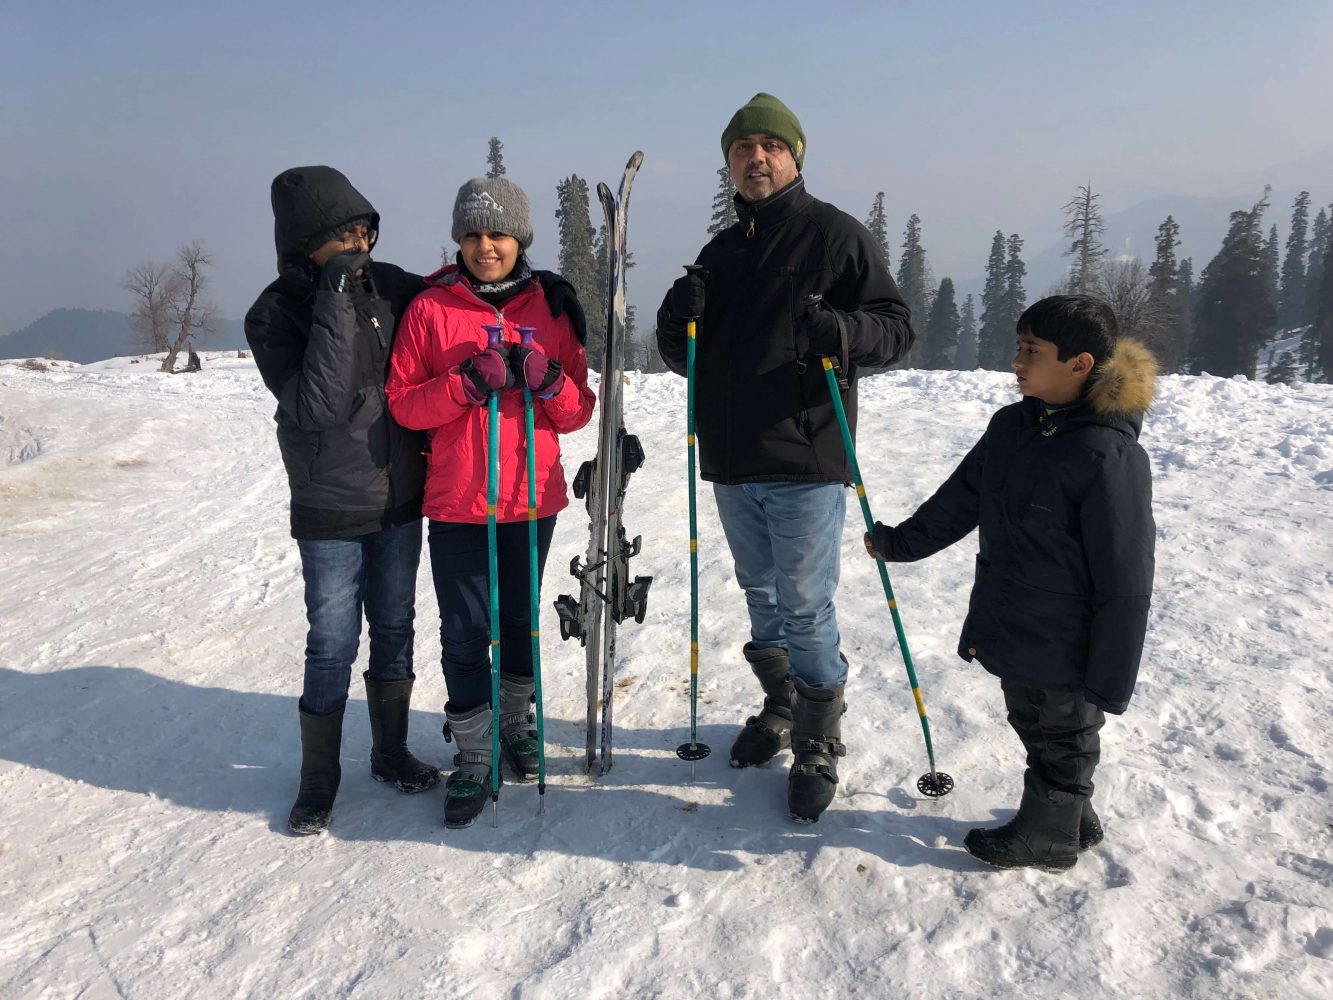 Family sharing skiing experiences together on a vacation